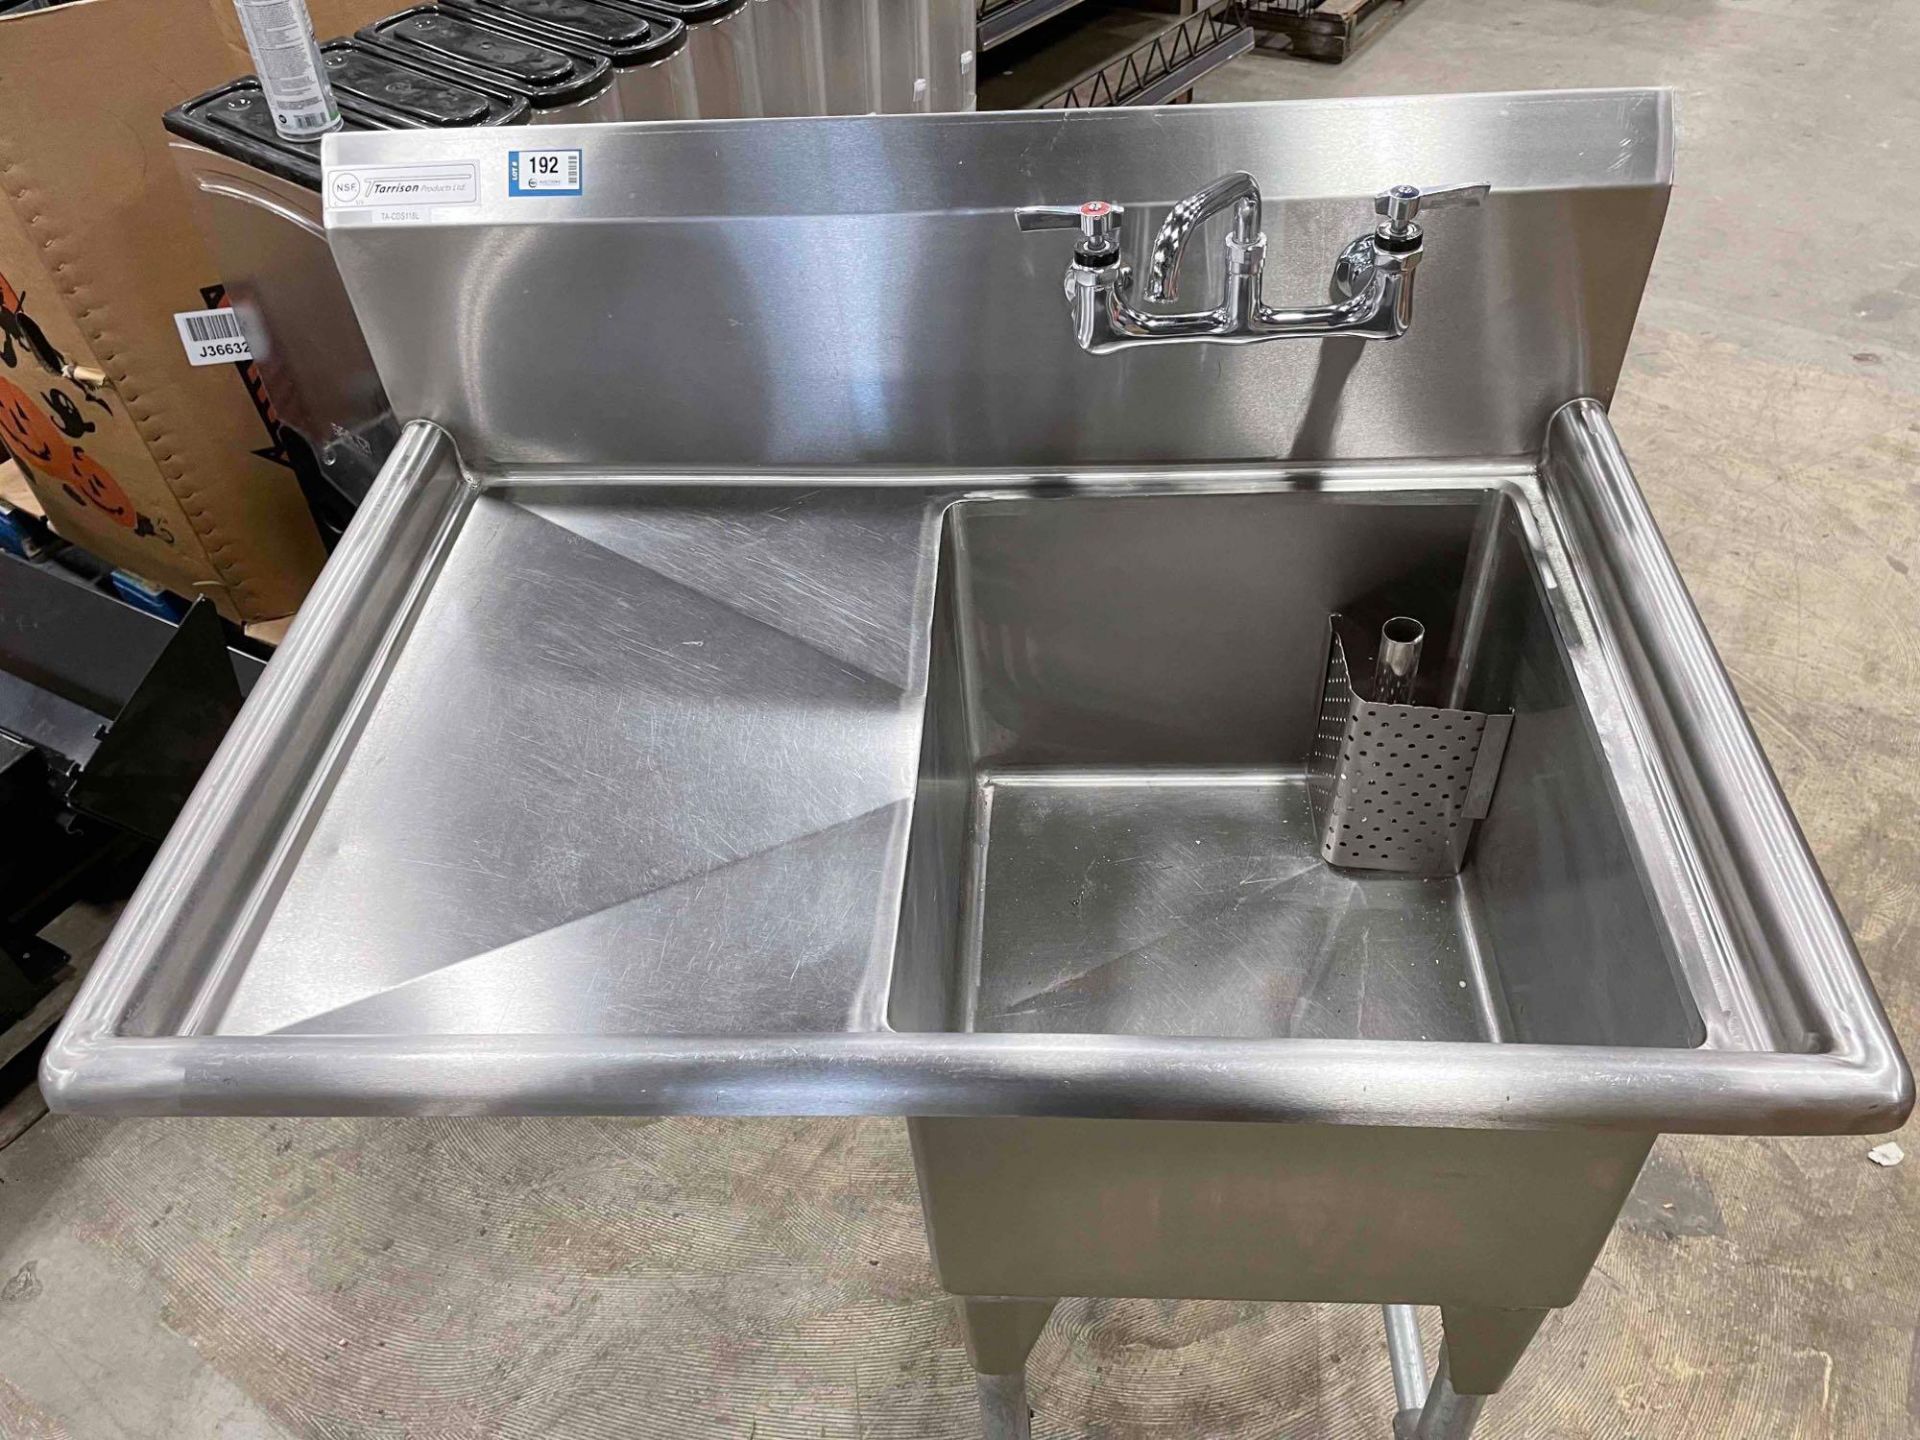 TARRISON TA-CDS1-18L SINGLE COMPARTMENT CORNER DRAIN SINK, LEFT DRAINBOARD AND TAPS - Image 2 of 6